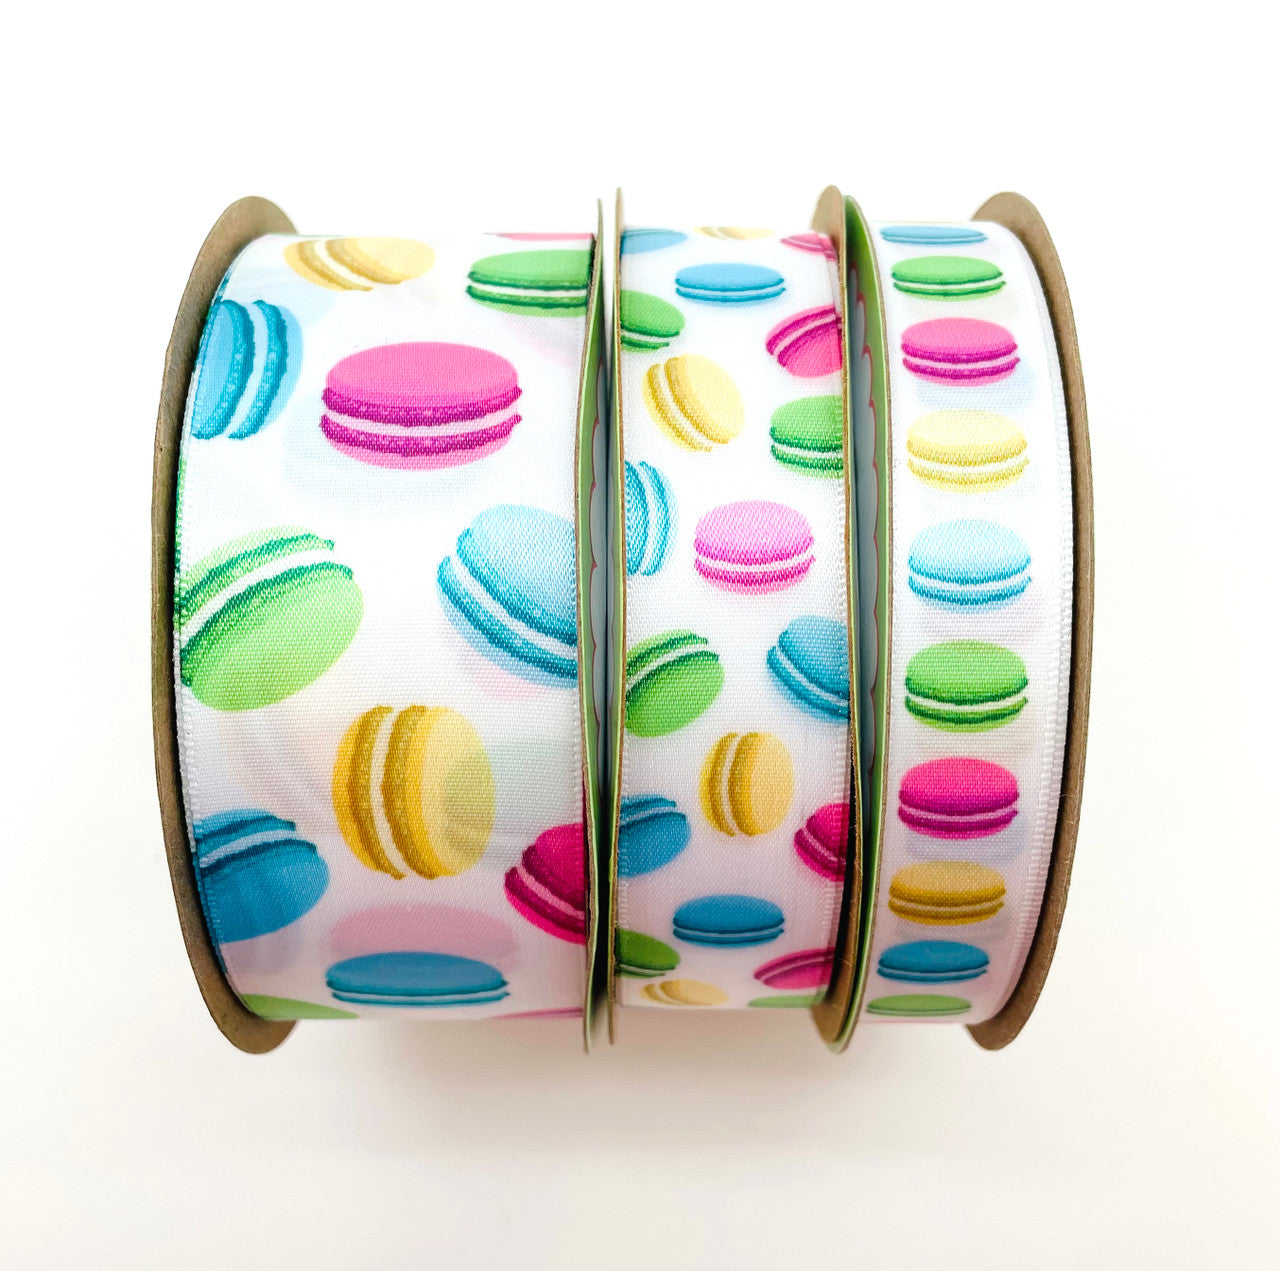 We offer our macaroon ribbon in three widths, choose among 5/8", 7/8" and 1.5" sizes to suit all our creative needs!